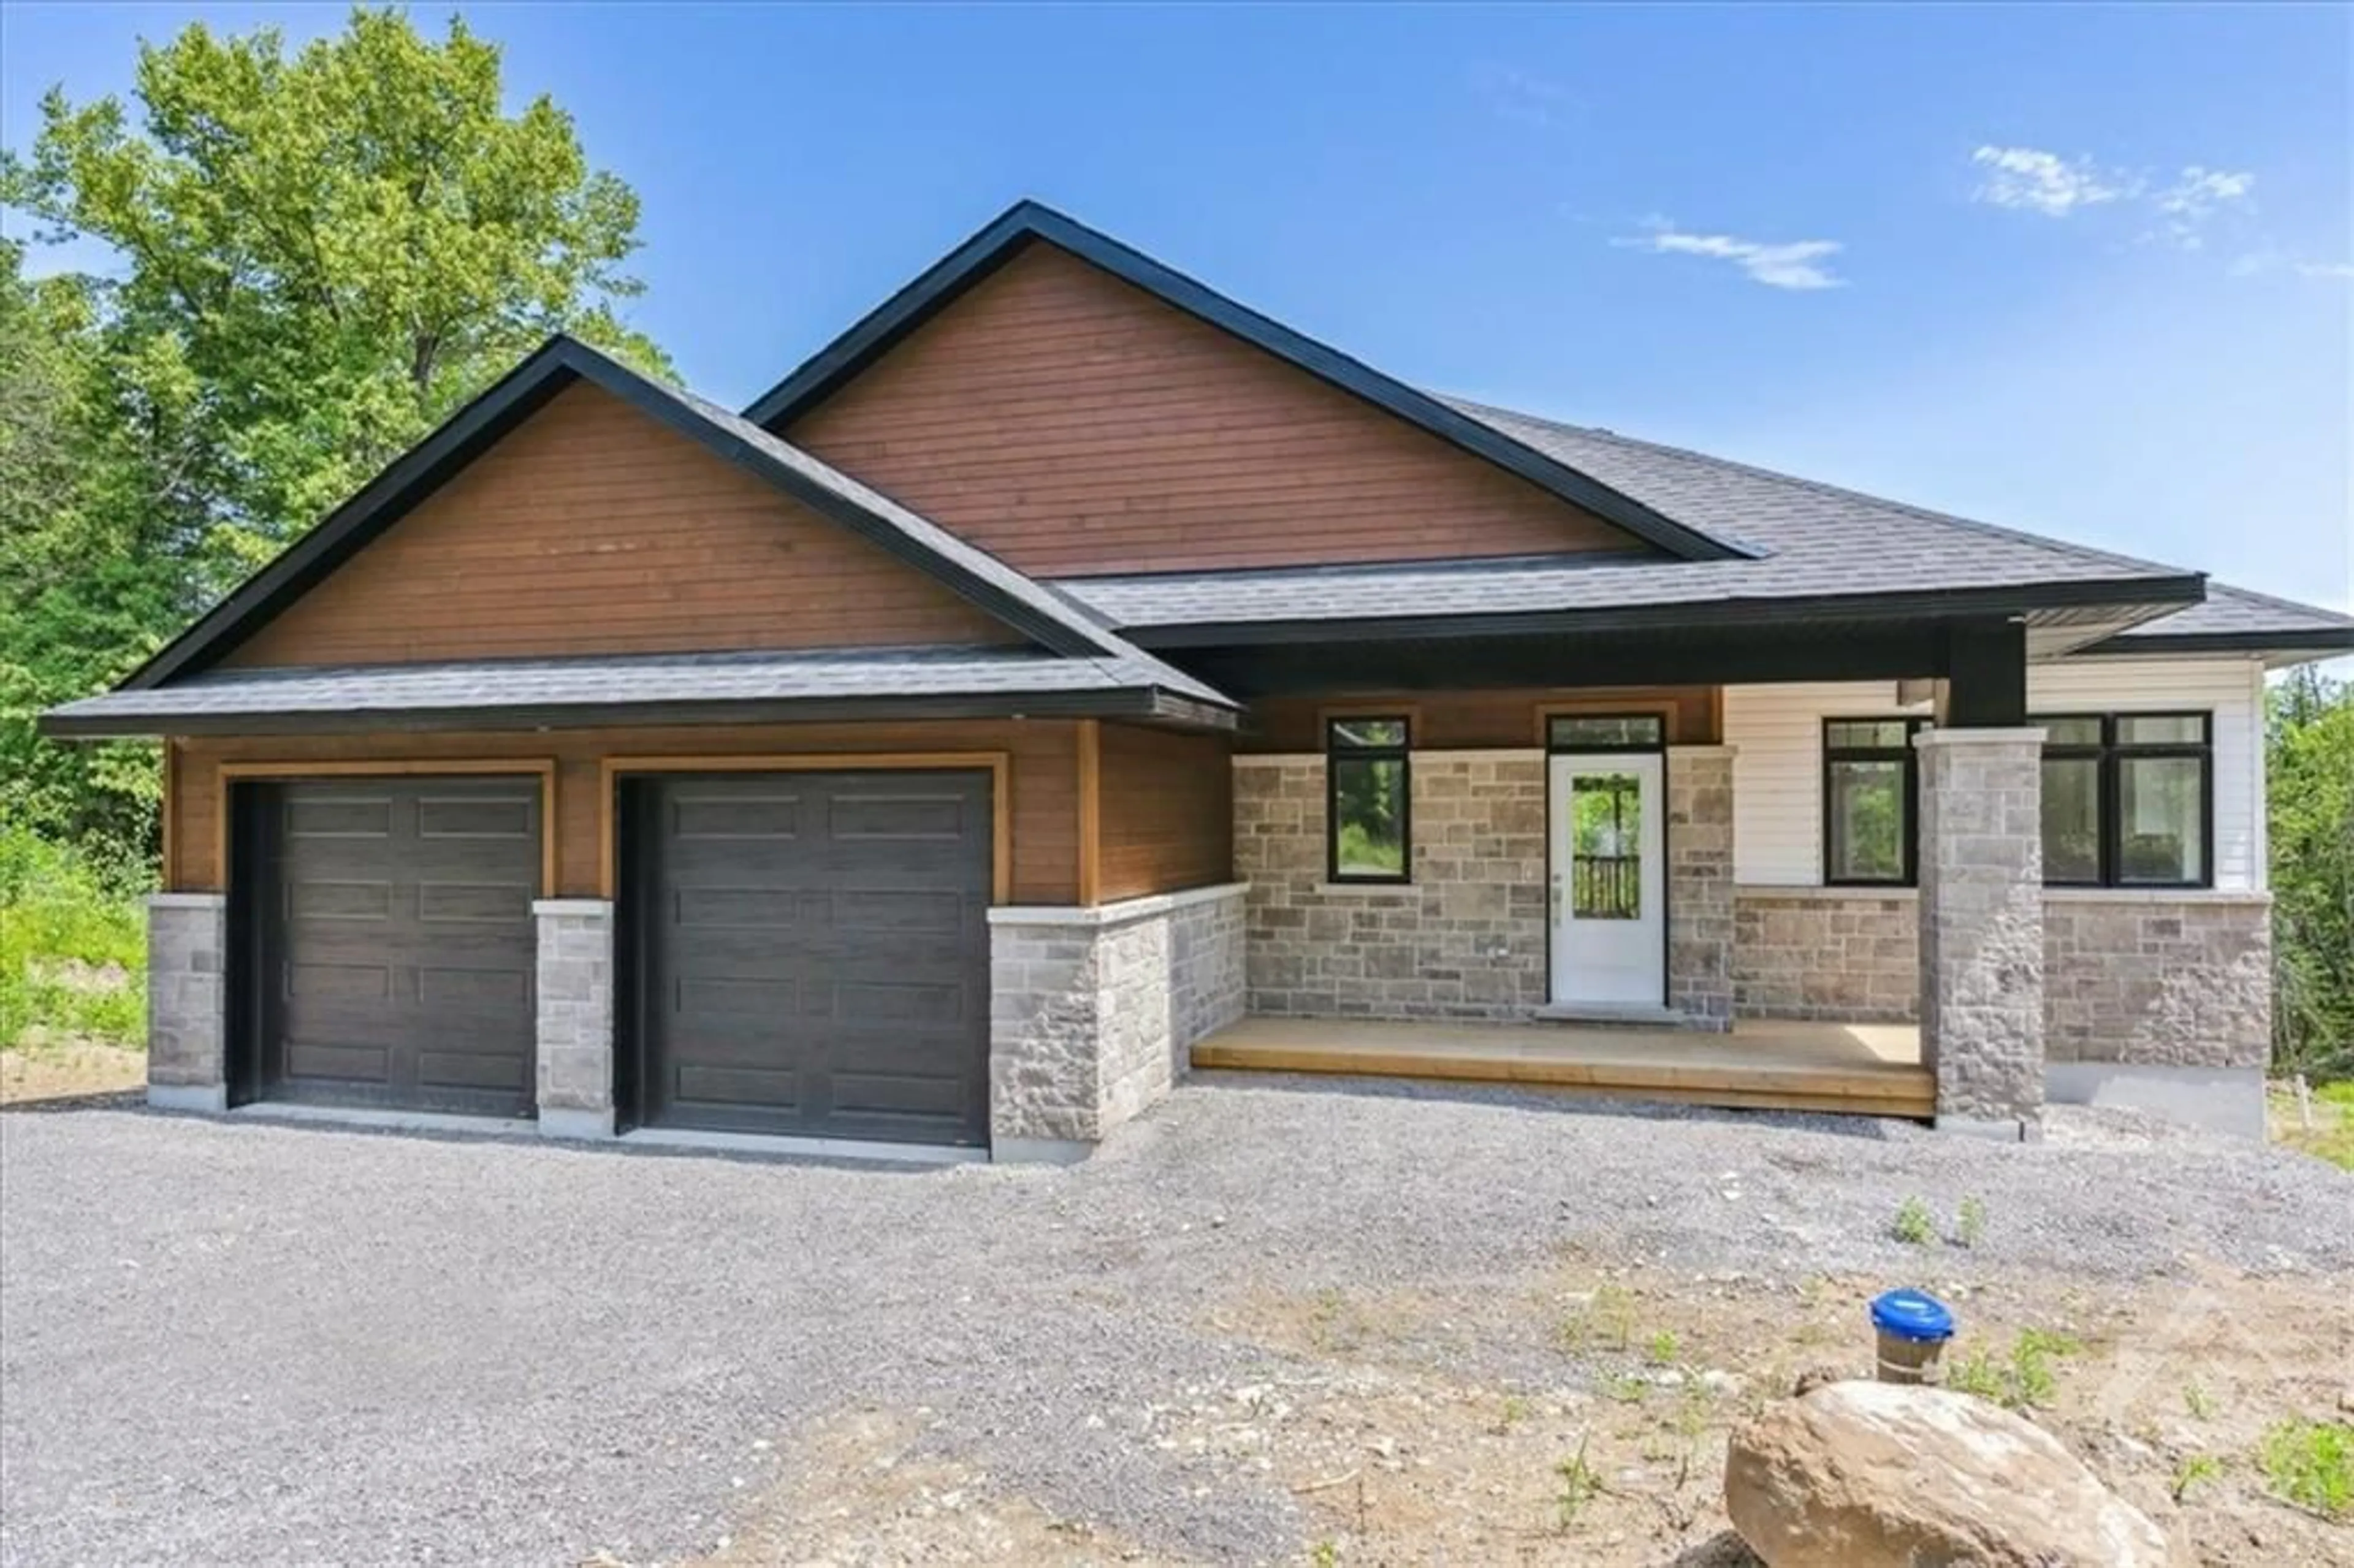 Home with brick exterior material for 197 JAMES ANDREW Way, Beckwith Ontario K7A 4S7